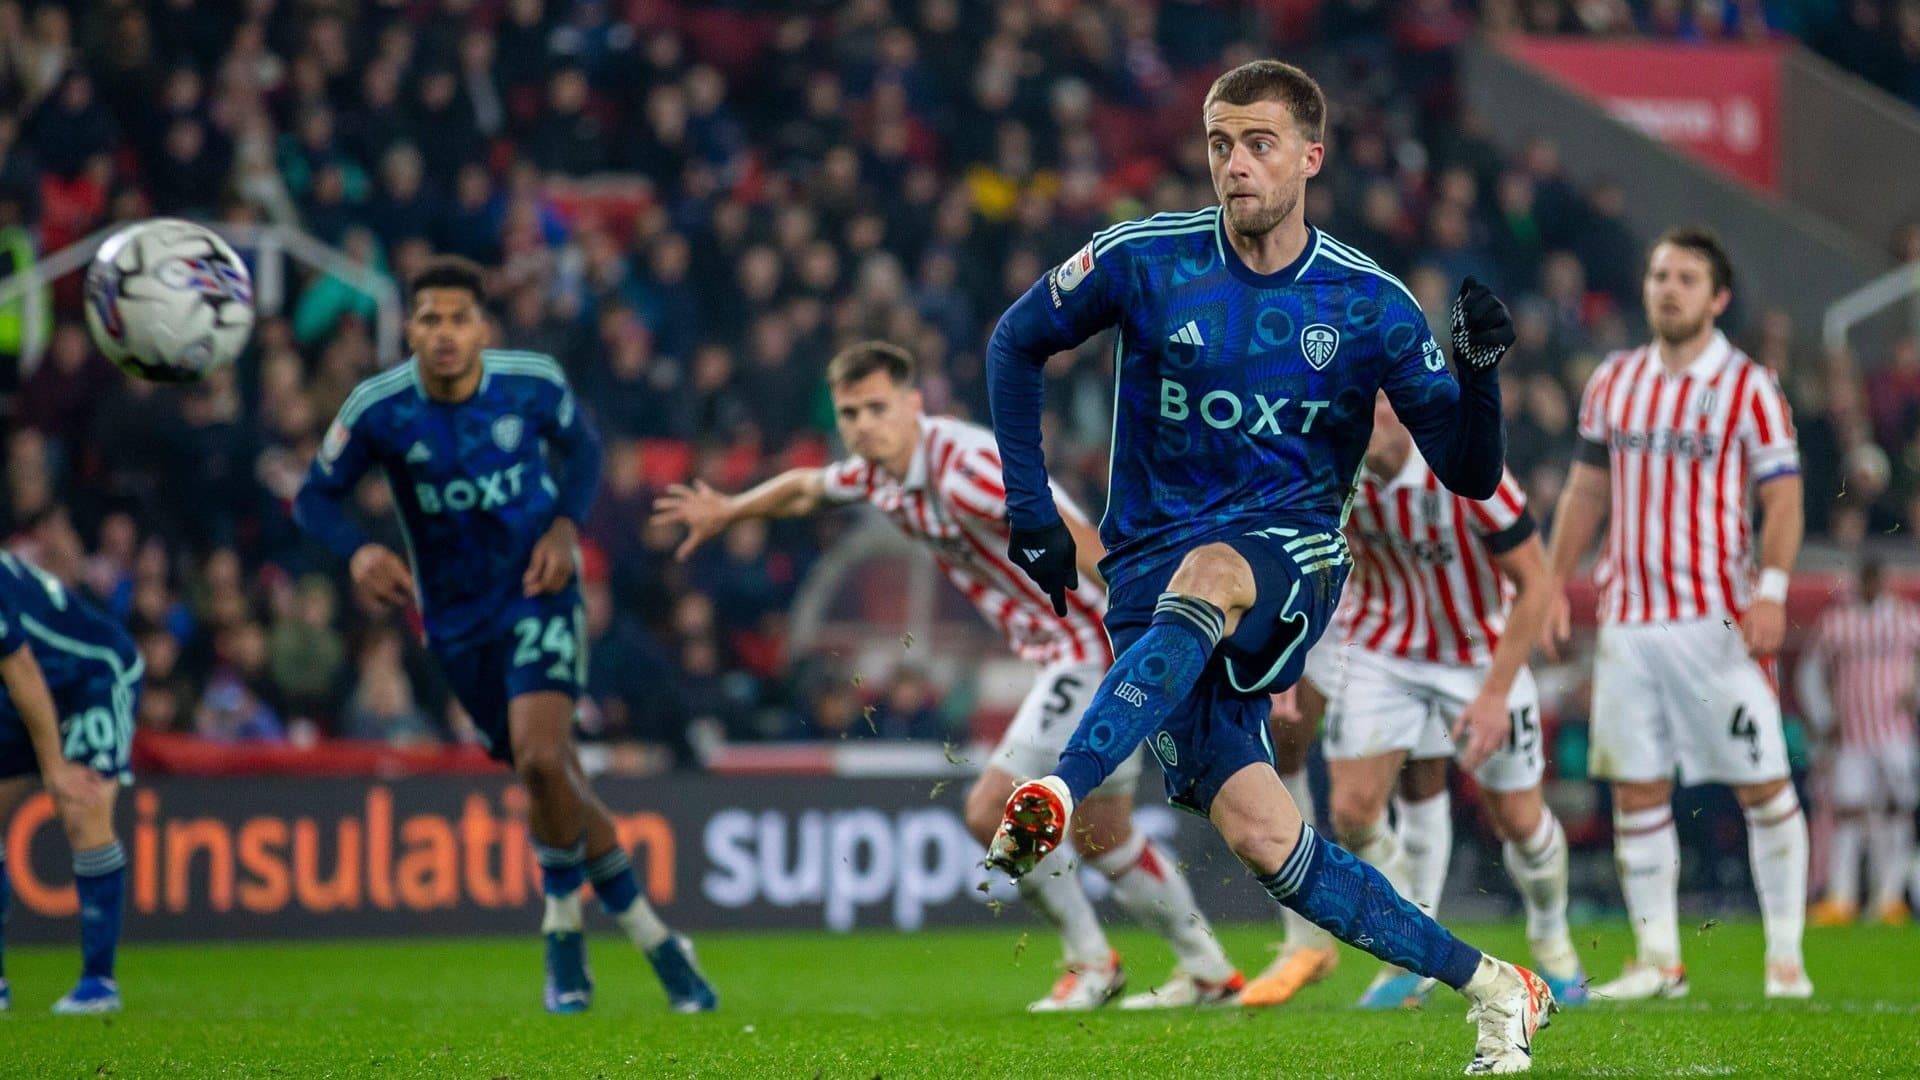 Pat Bamford in the blue peacock print kit at Stoke, having a little try at taking a penalty, while Stoke's Ben Pearson lurks